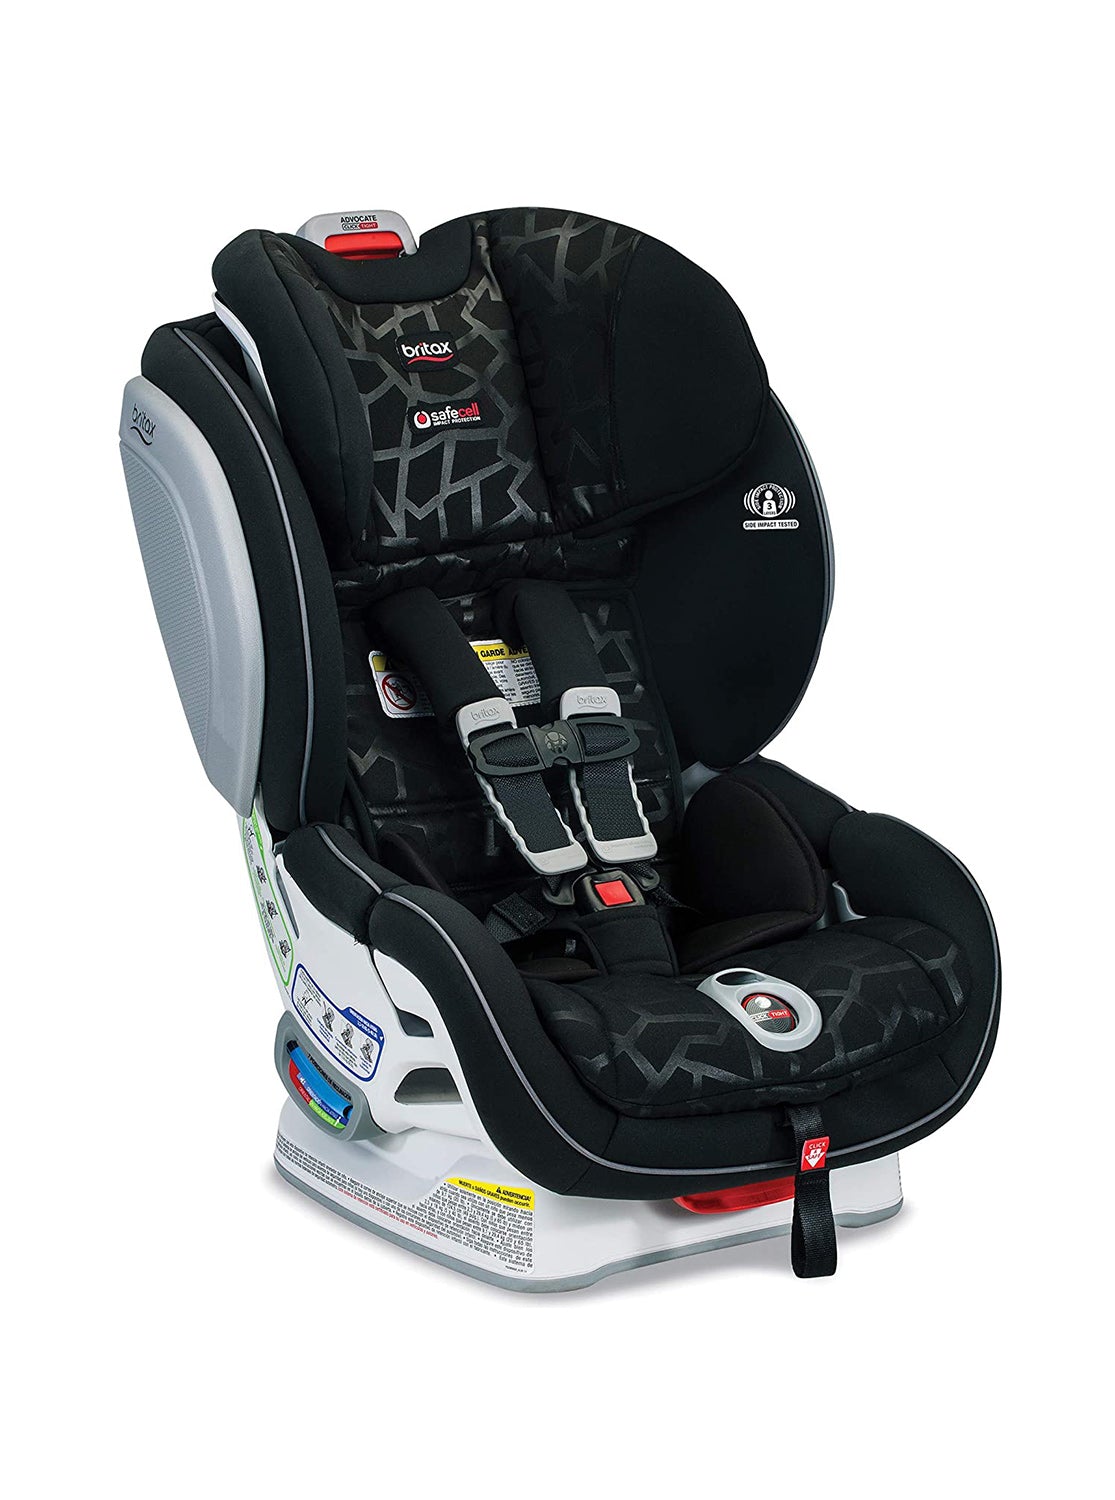 BRITAX Advocate ClickTight Convertible Car Seat - ANB Baby -$300 - $500